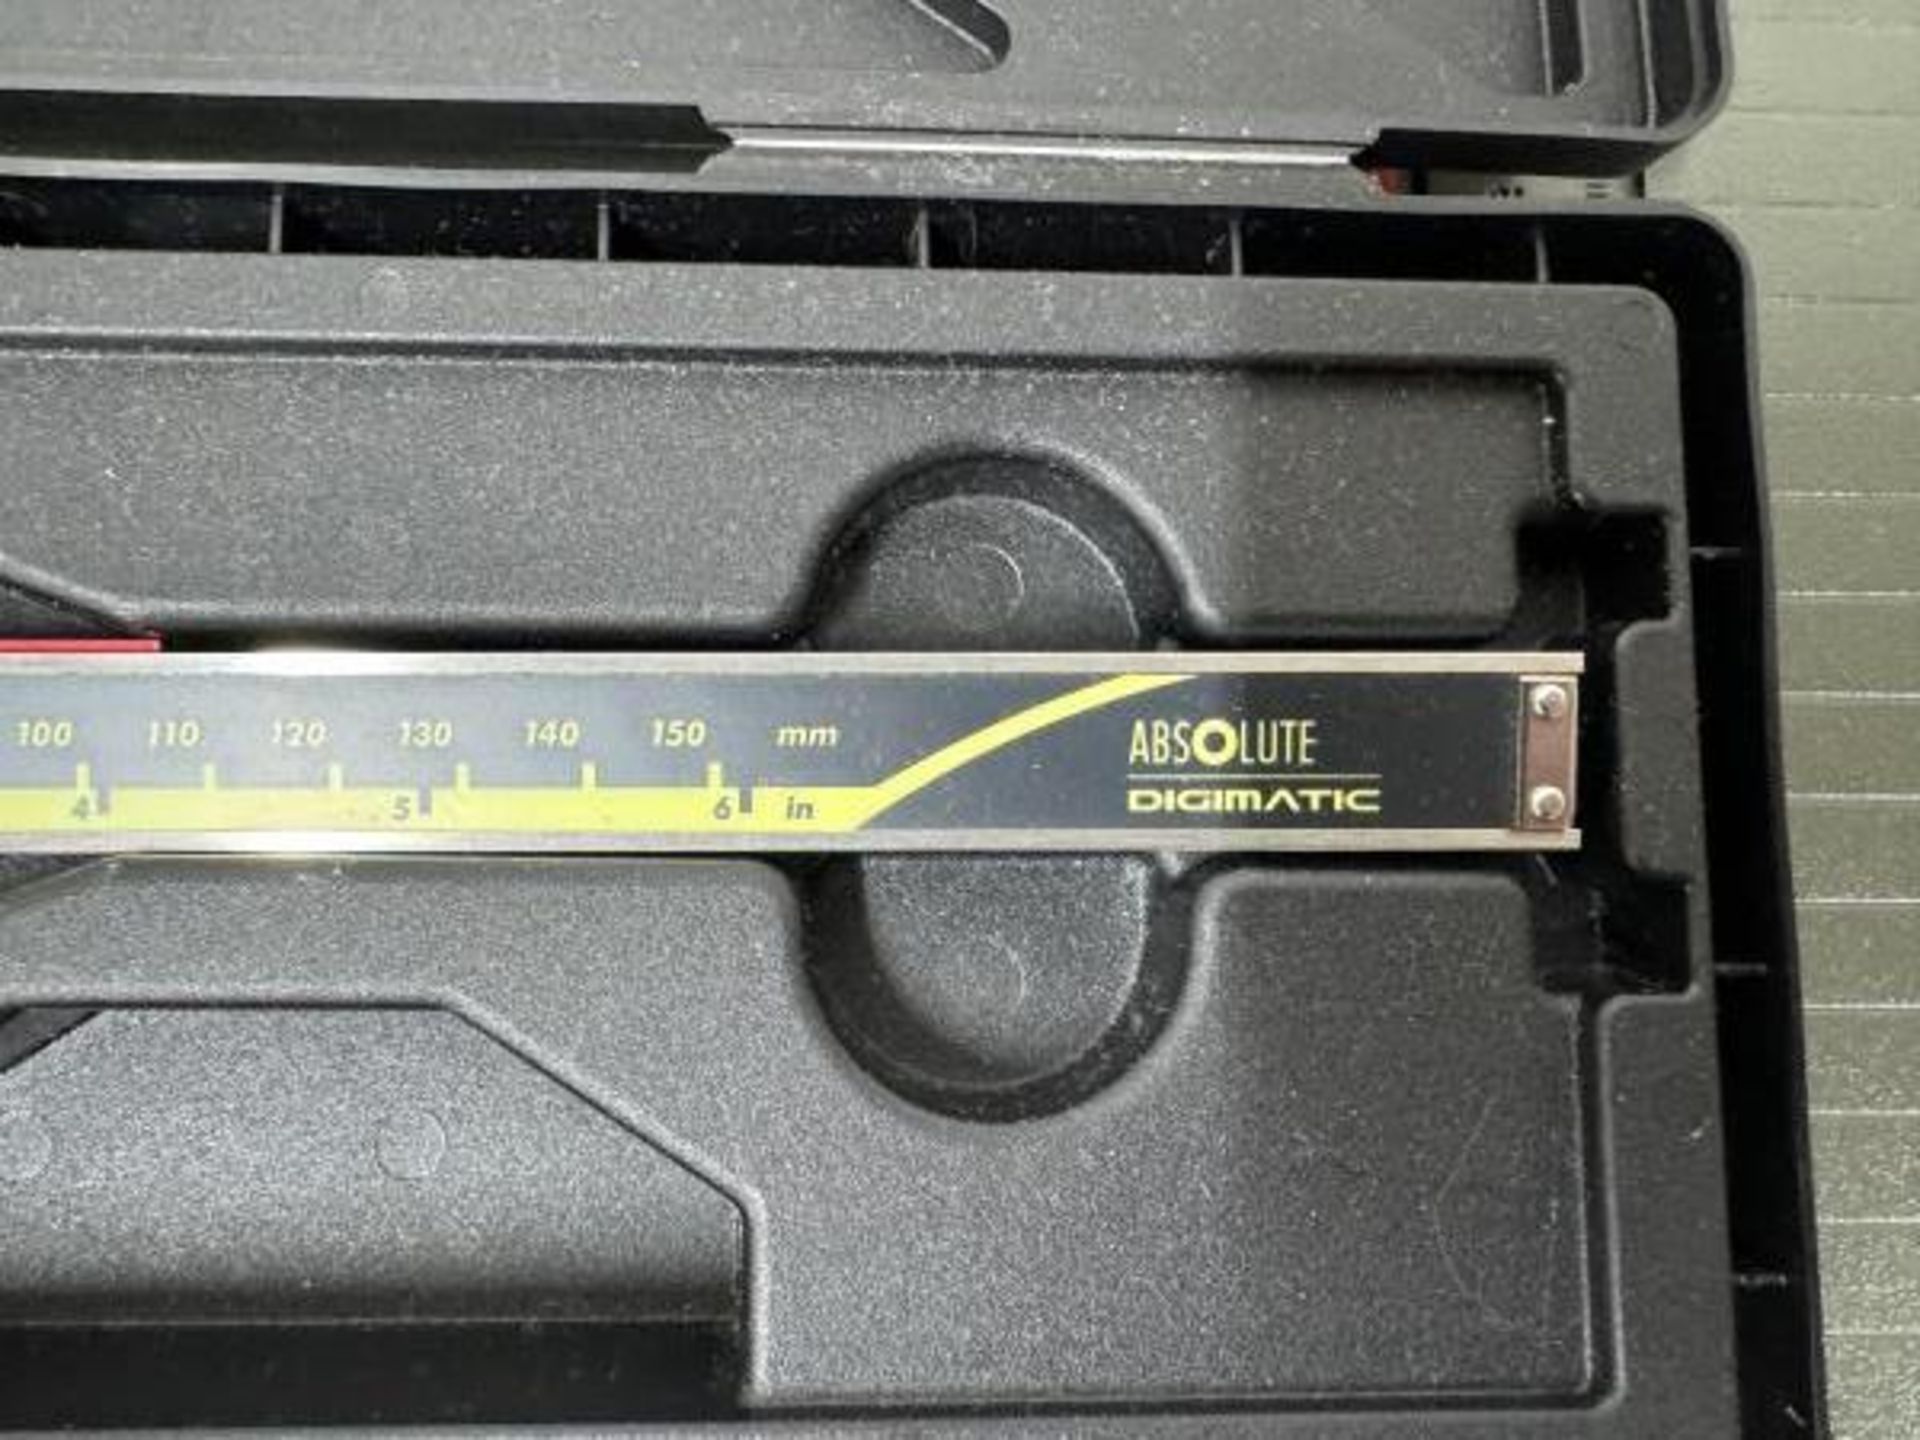 Mitutoyo Abolute Digimatic with Measure Cutting Board - Image 3 of 6